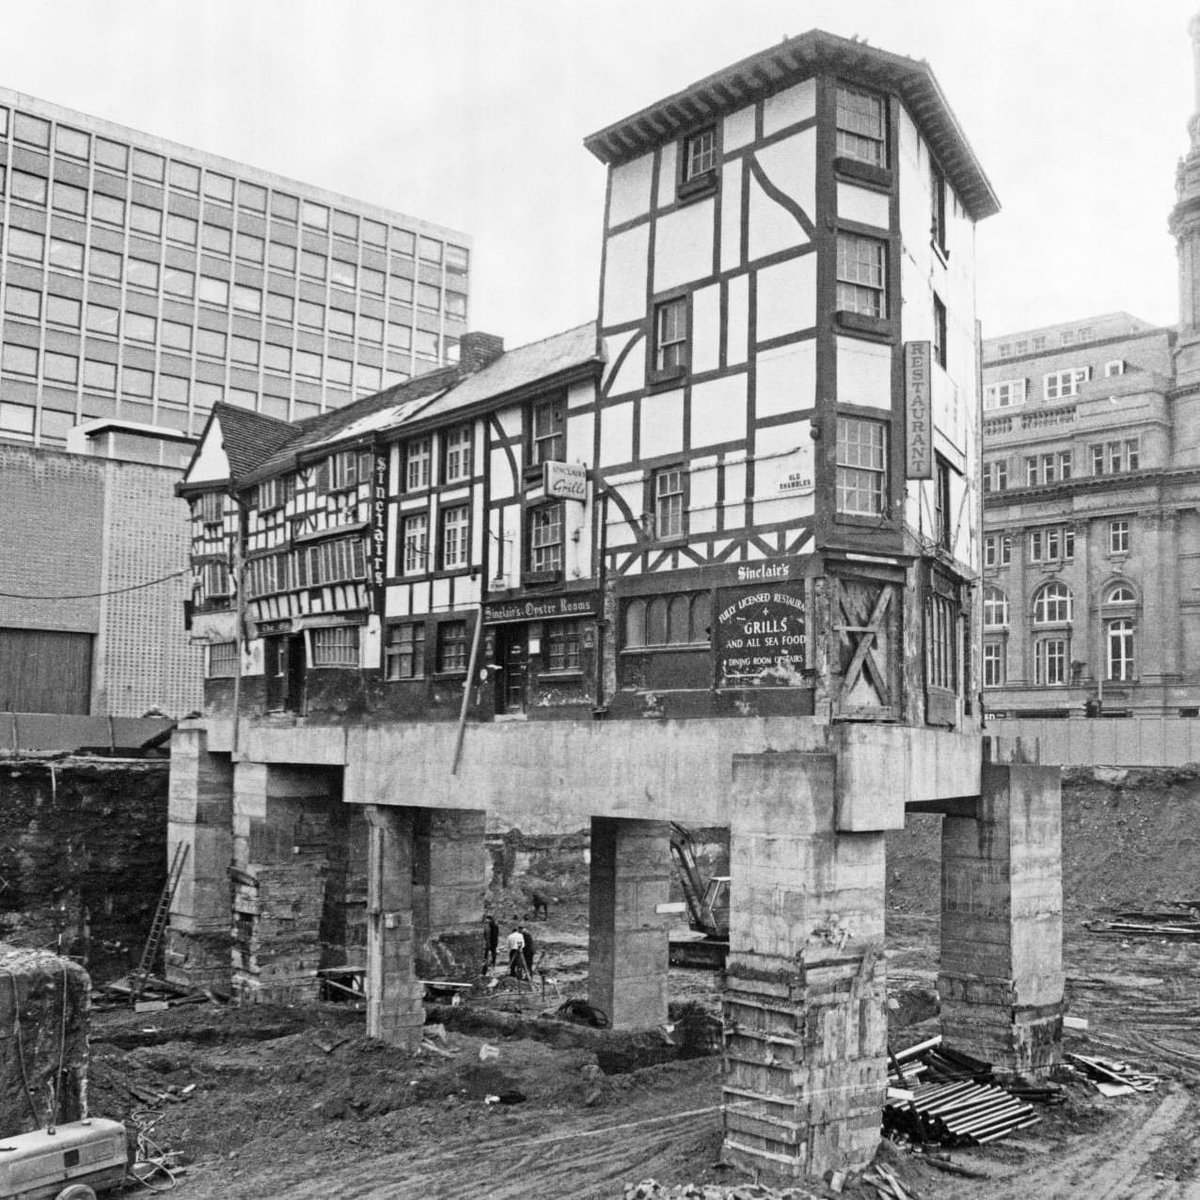 Look at this! “The Old Wellington Inn and Sinclair’s Oyster Room in Manchester were once a house, built around the mid-16th century. Photo taken in 1971 when the building was underpinned with concrete stilts & raised to fit the new street level. Later moved to Exchange Sq.”